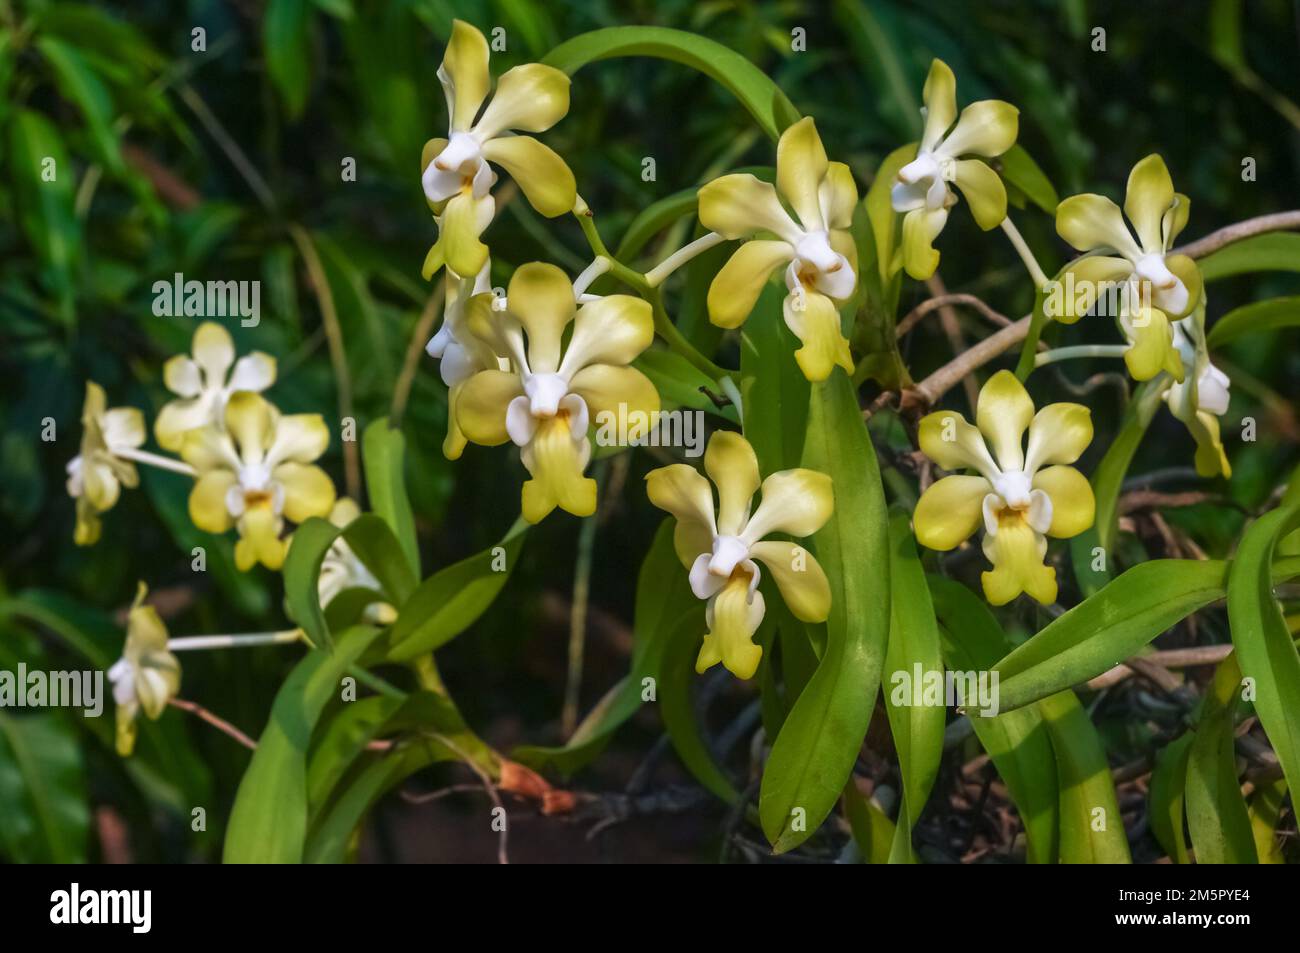 Closeup view of bright yellow and white flowers of epiphytic orchid species vanda denisoniana blooming outdoors on natural background Stock Photo